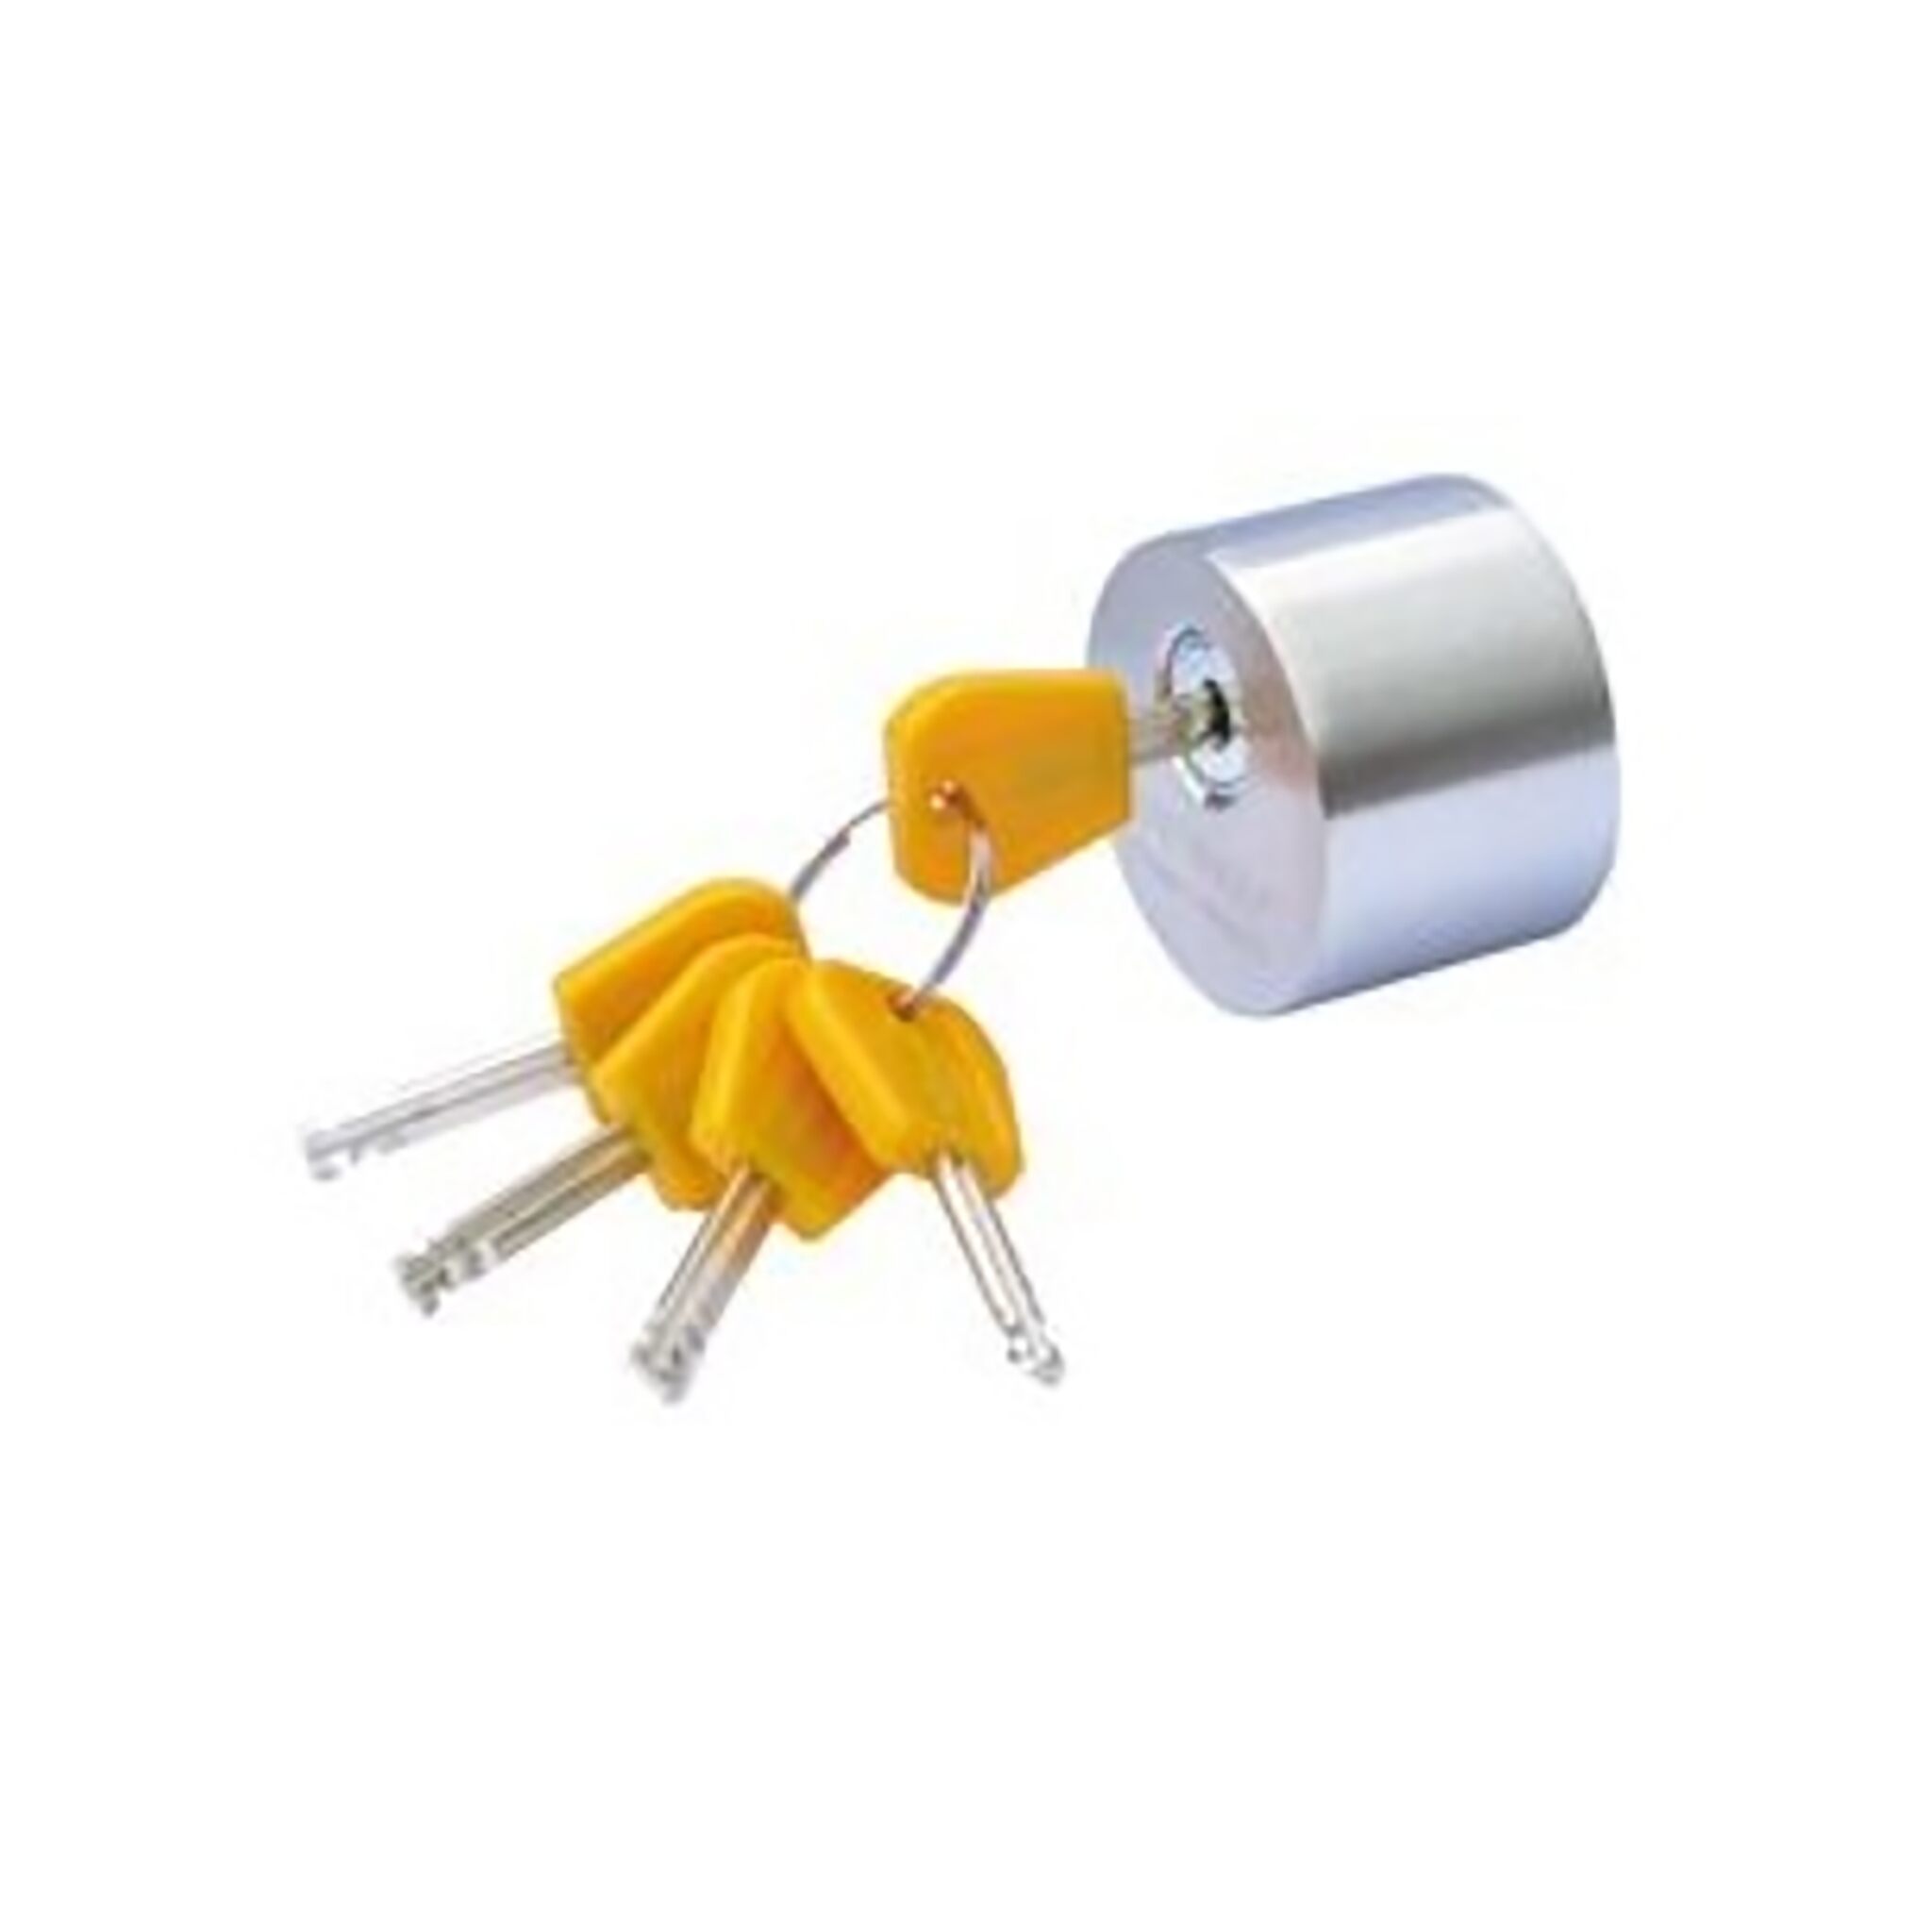 STEADY outboard lock, up to 10 hp